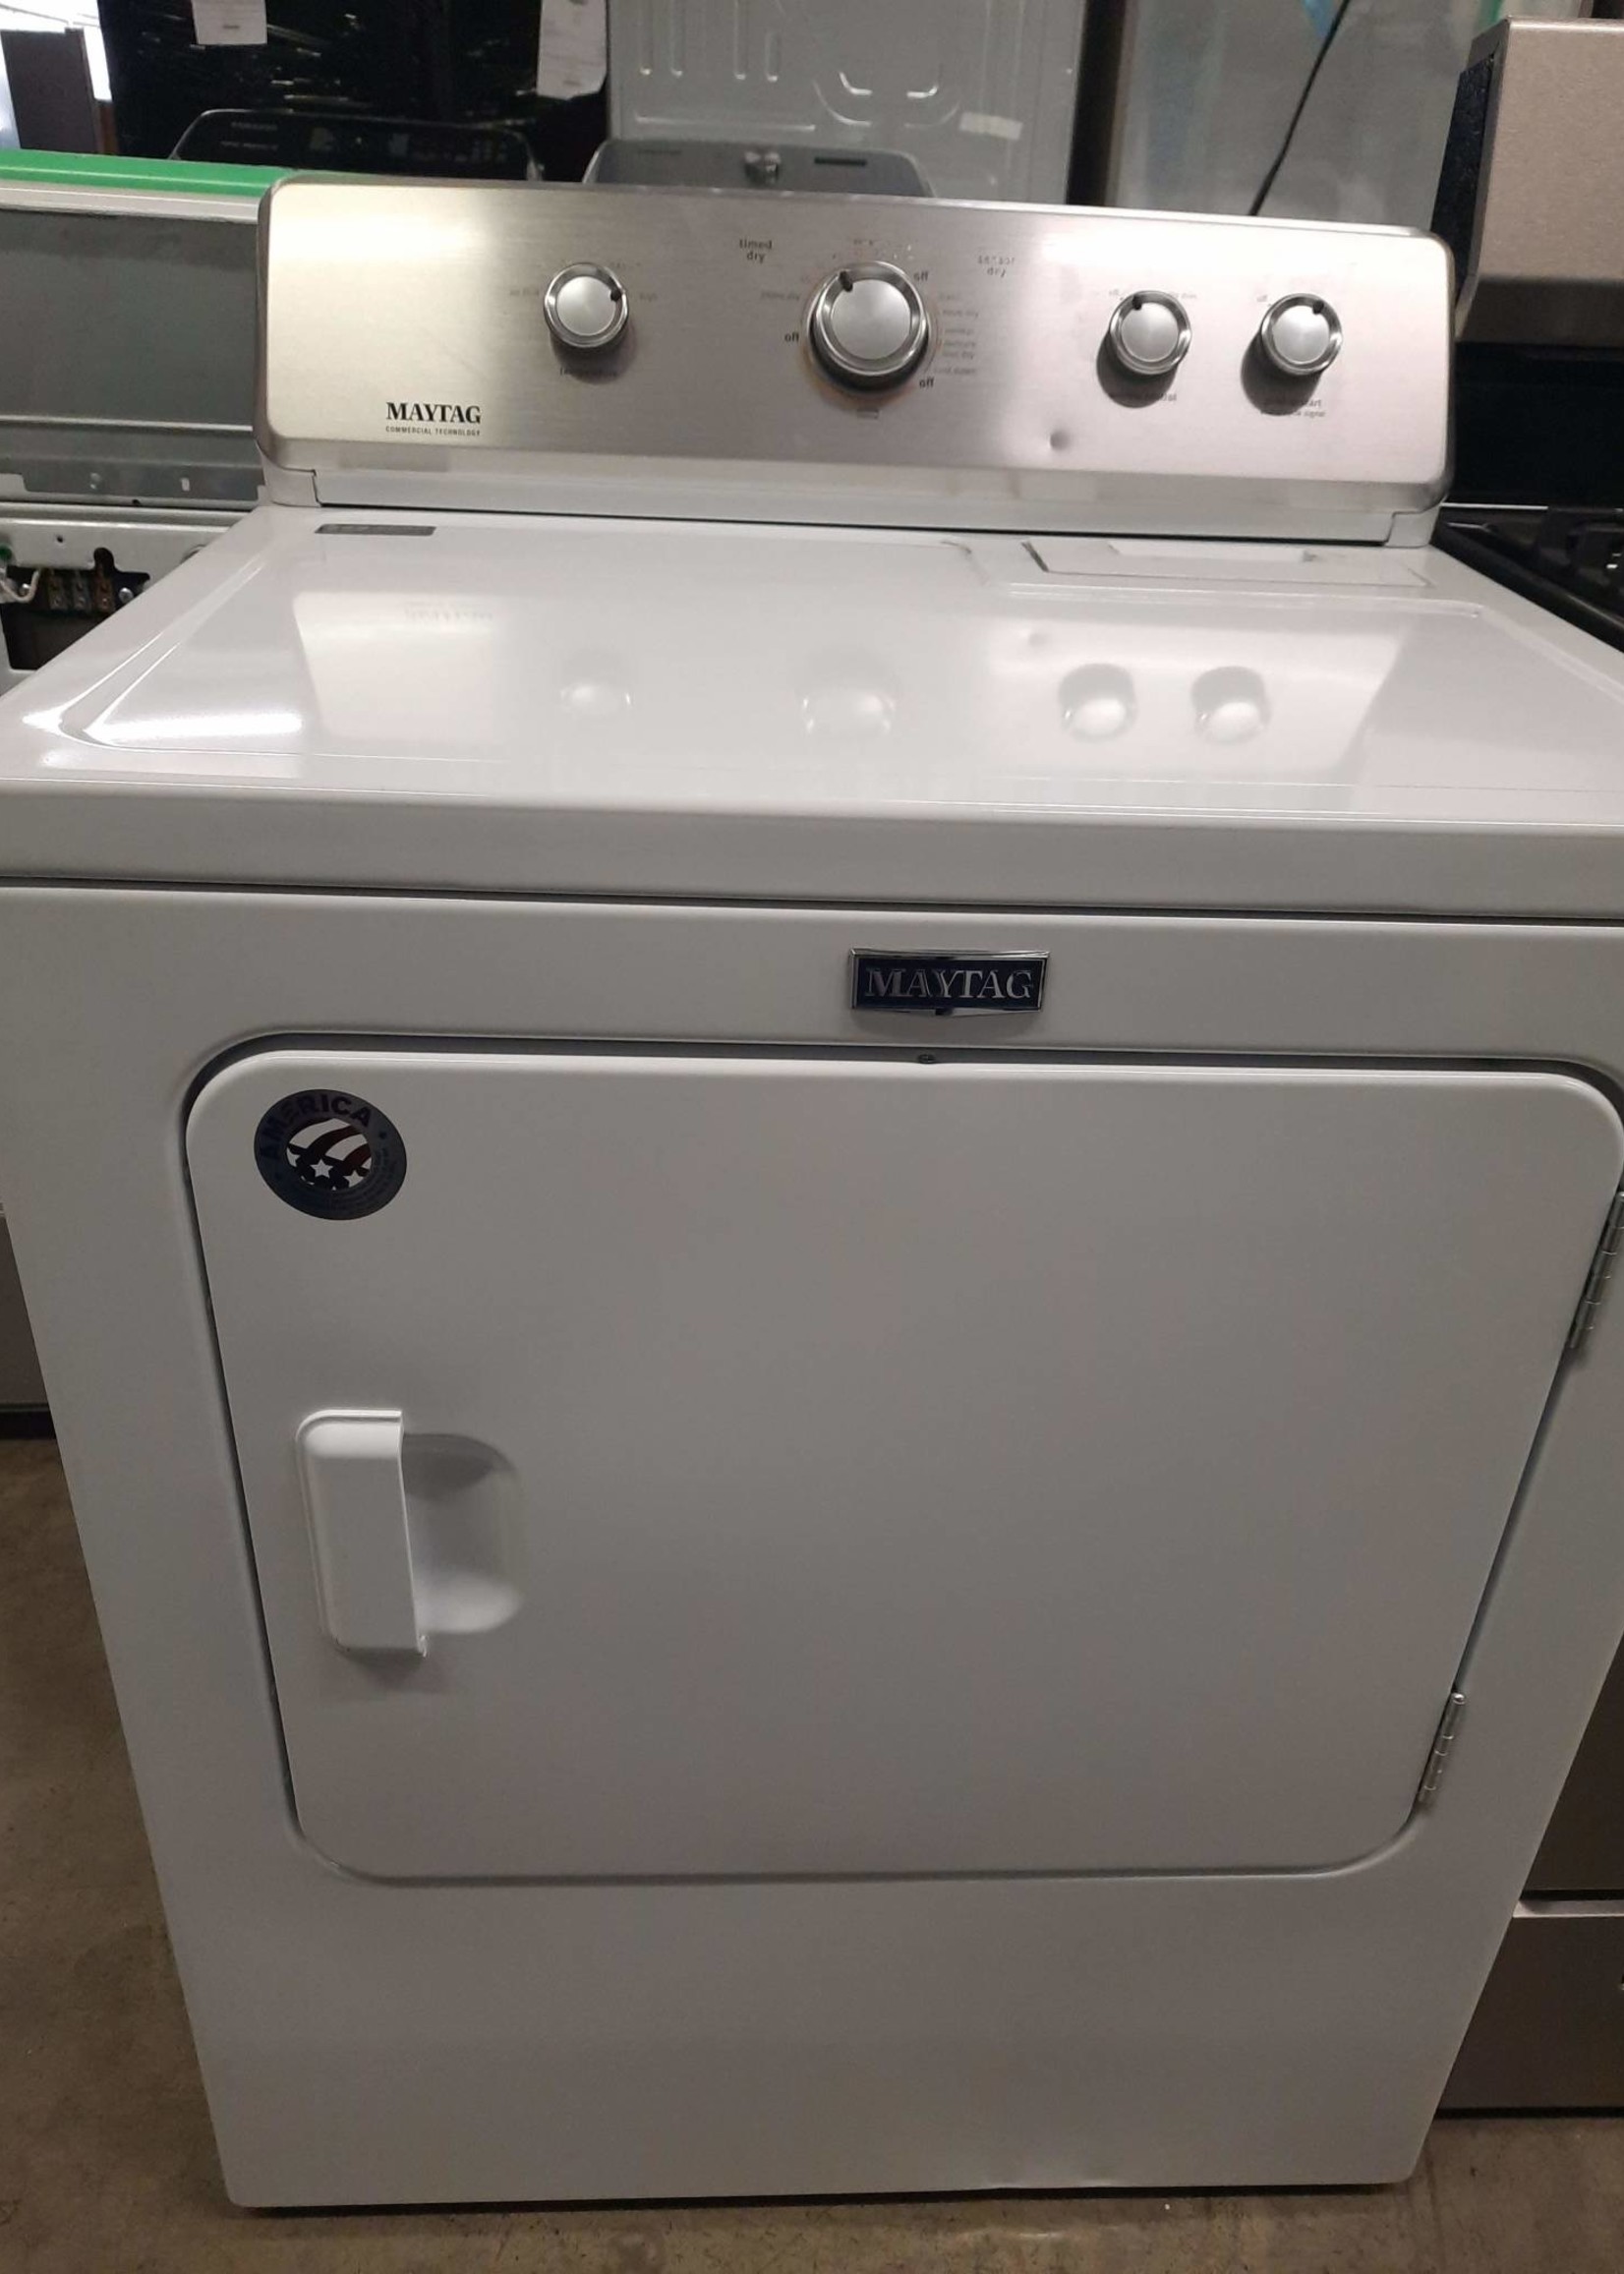 Maytag *Maytag  MEDC465HW 7.0 cu. ft. 240-Volt White Electric Vented Dryer with Wrinkle Control